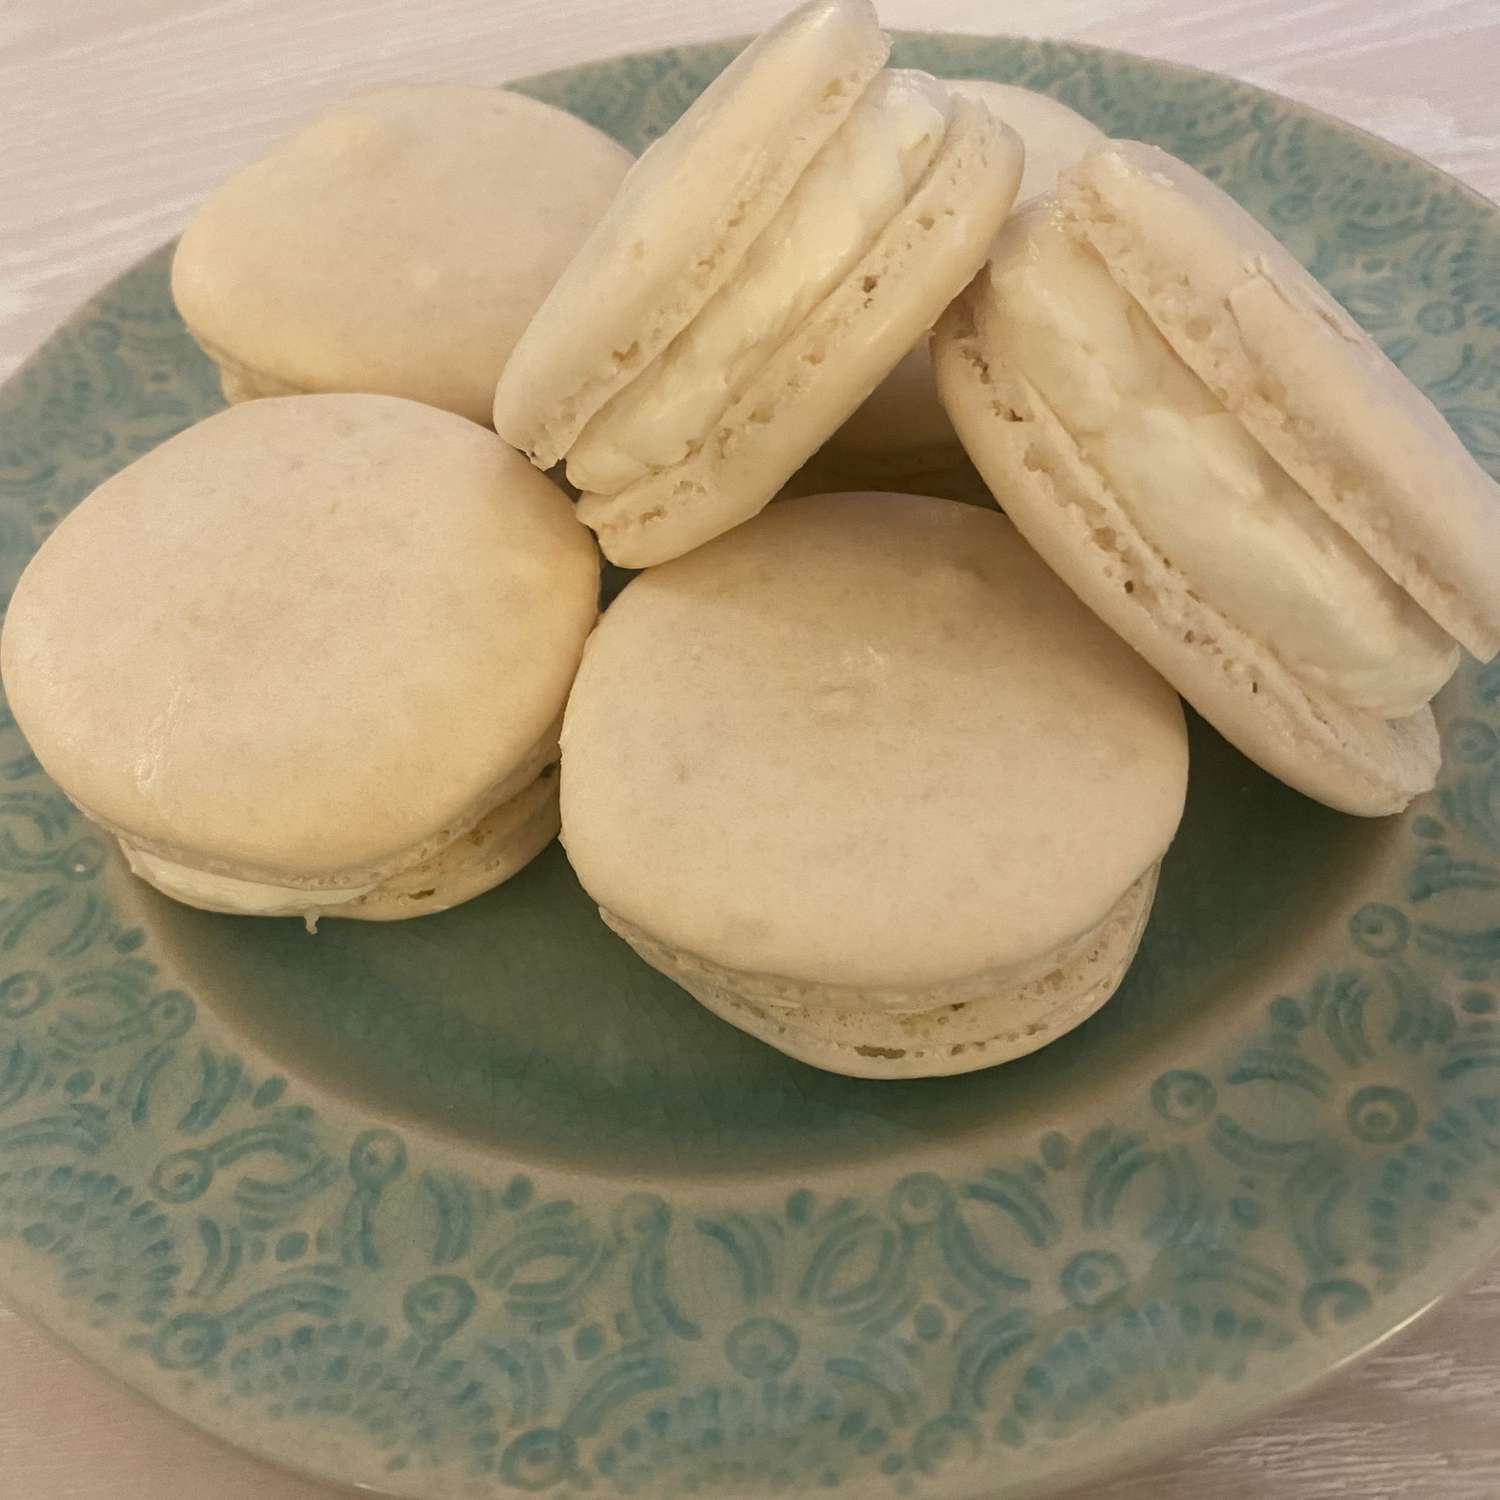 French macarons on a blue plate